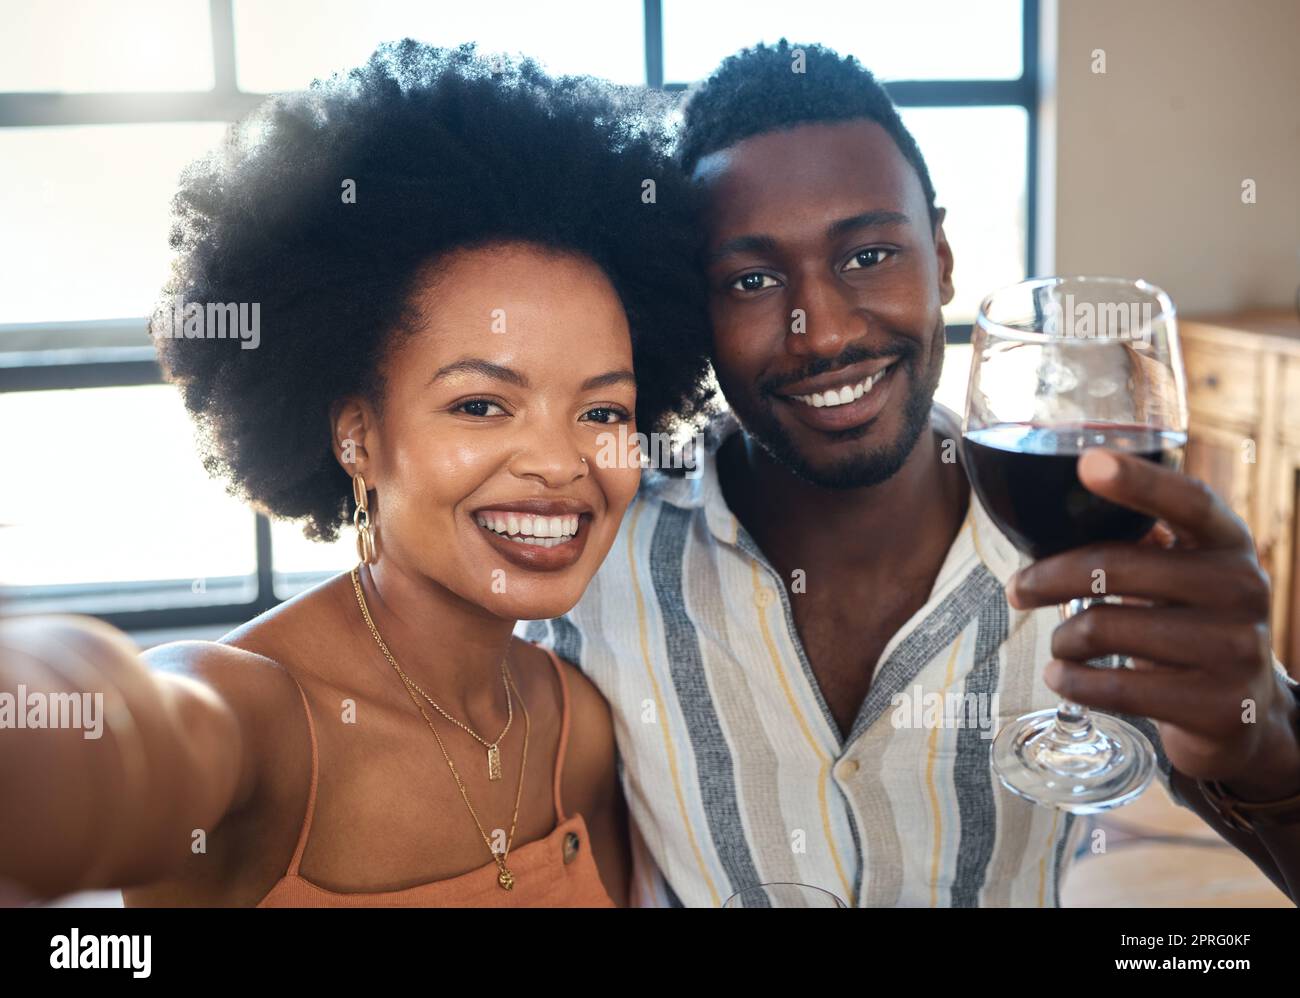 Couple selfie for social media to celebrate with wine glass, champagne and alcohol drinks for happy relationship on date together in a cafe restaurant. Portrait of love, relax and smile black people Stock Photo